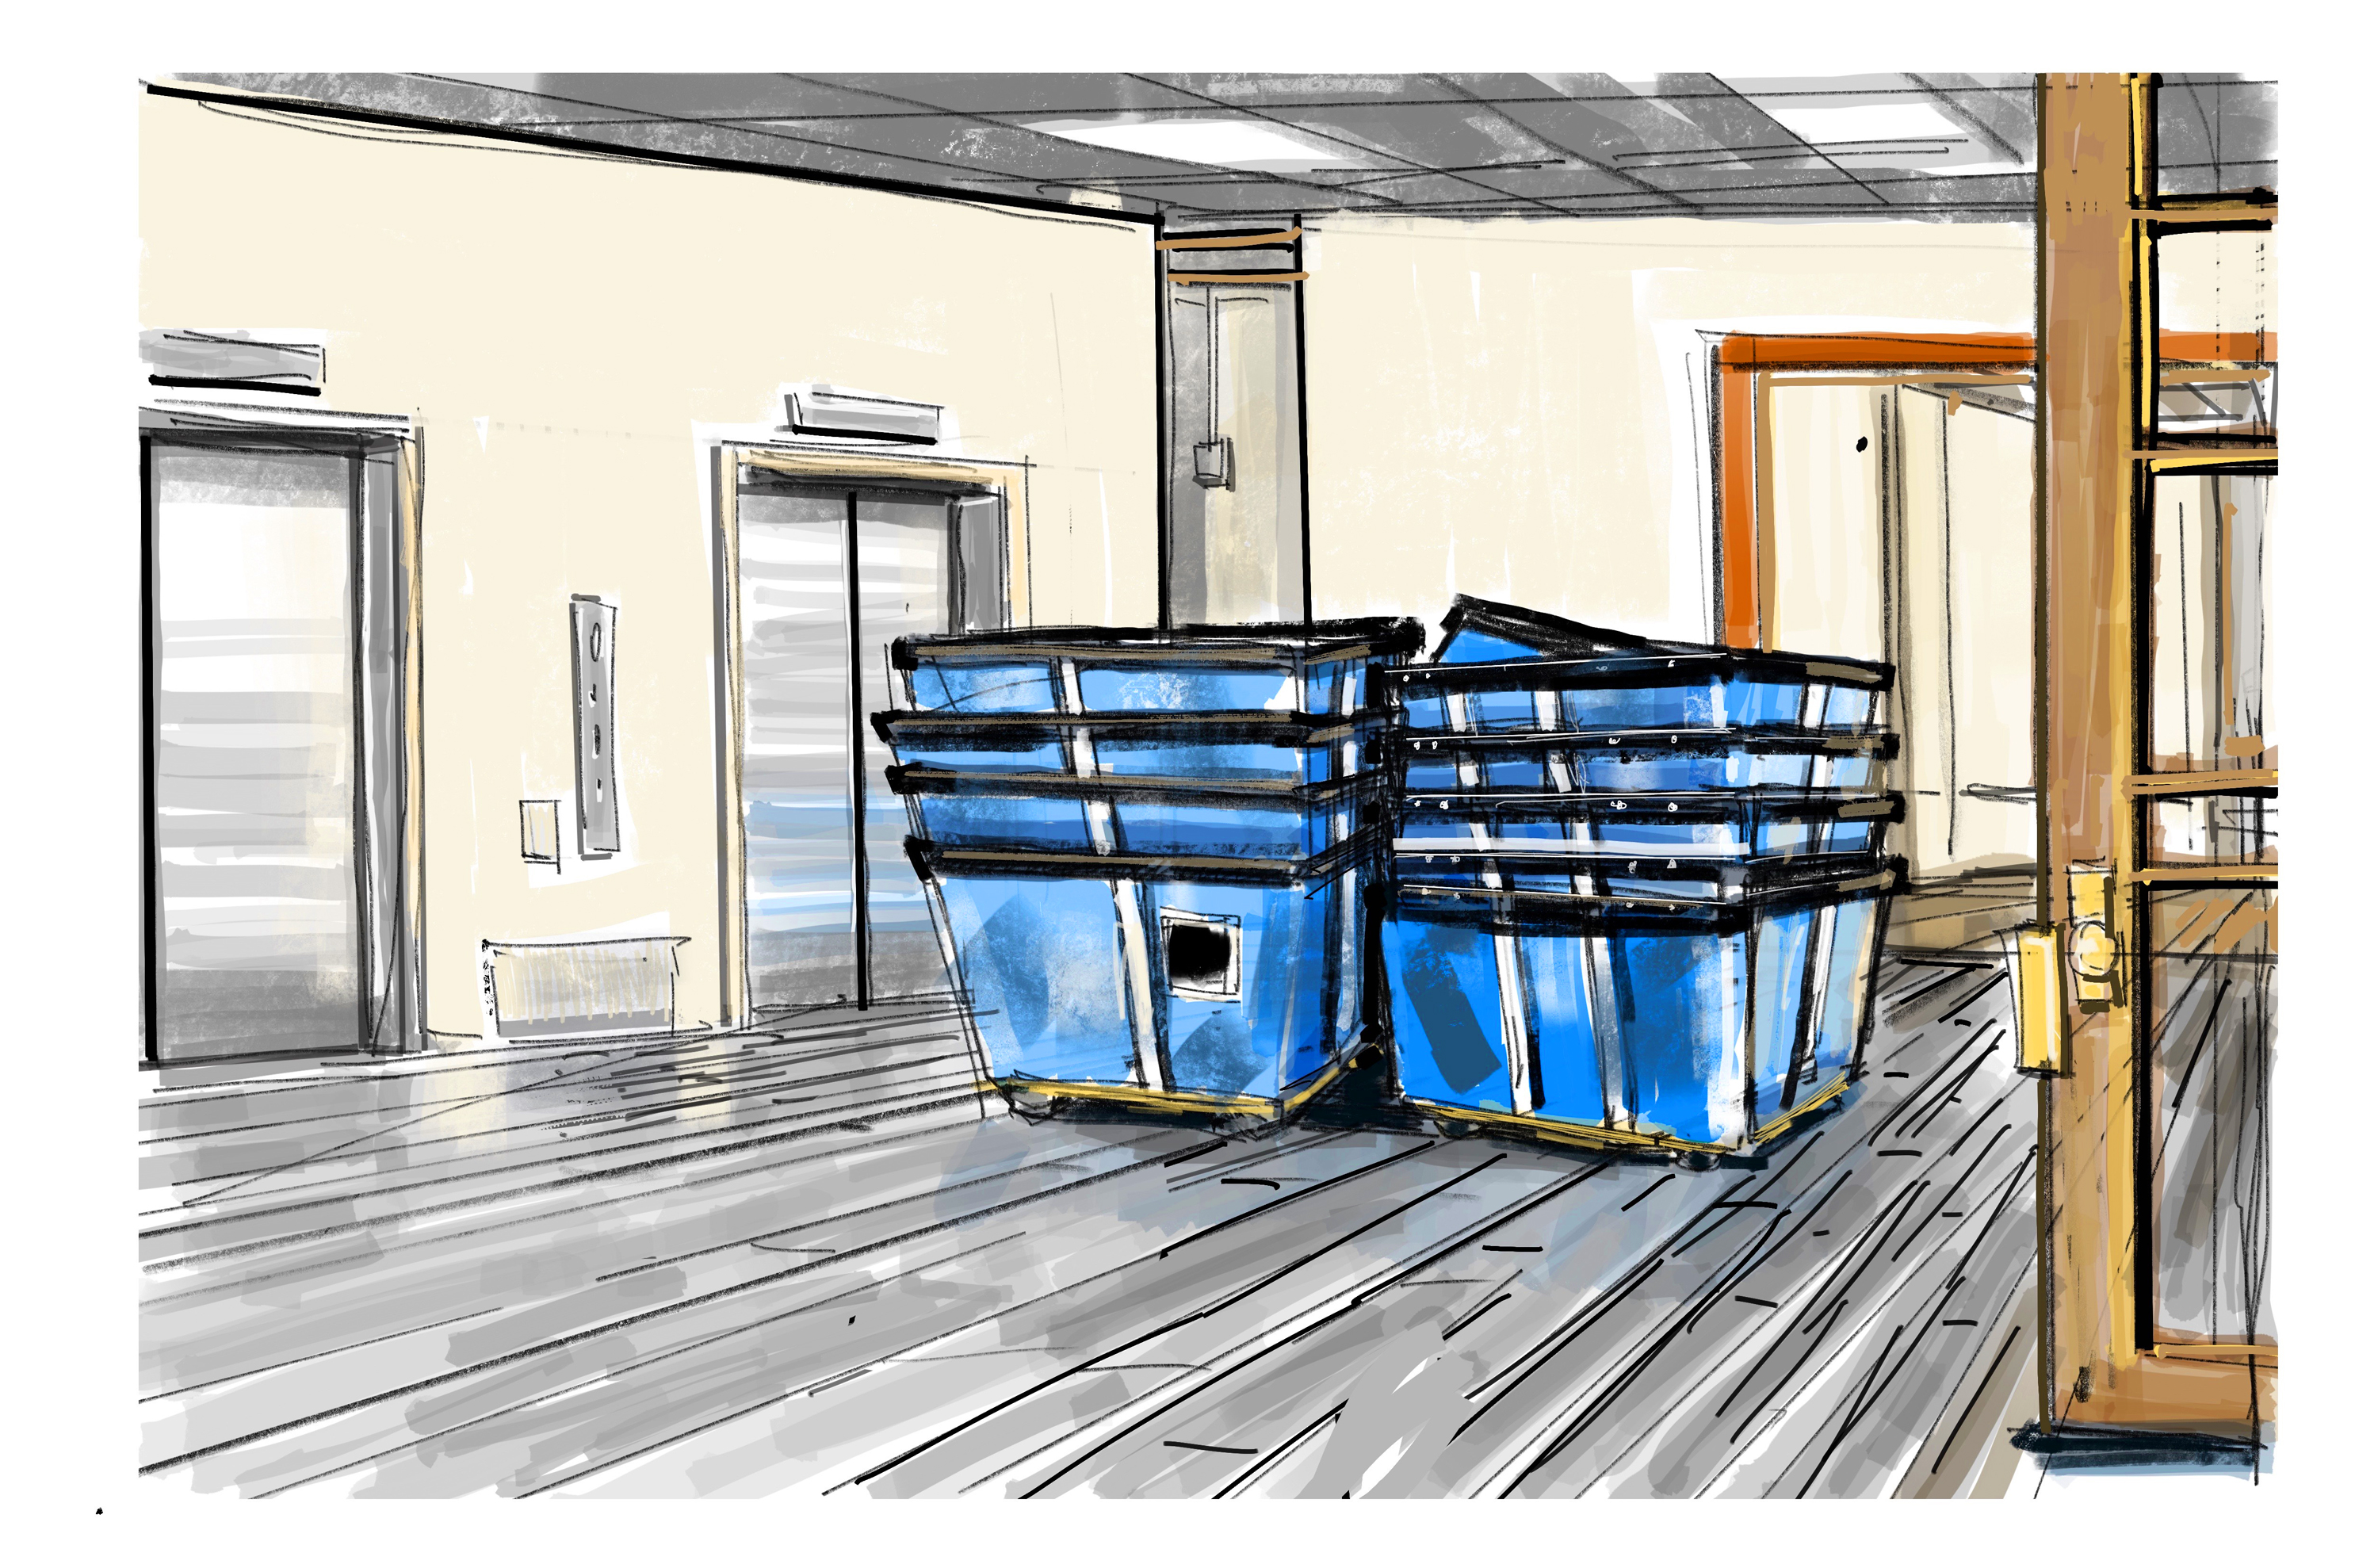 Sketch of two stacks of blue bins sitting outside the GLC elevators